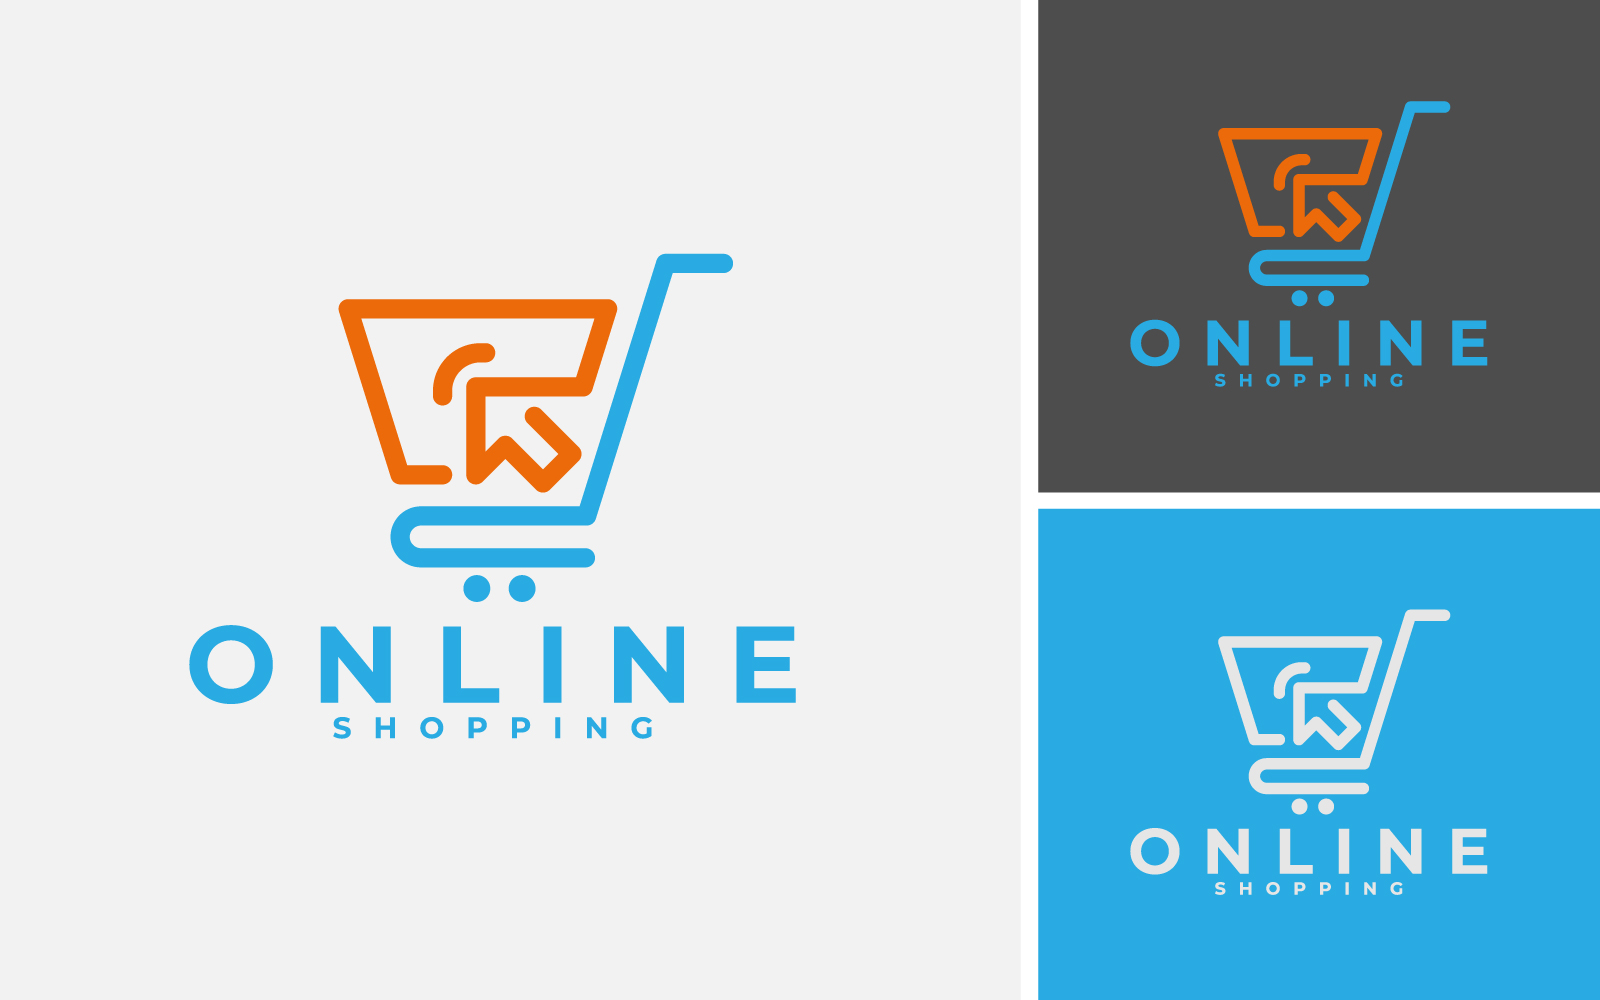 Online Shopping Logo Design With Mouse Cursor And Cart For E-Commerce Web Or Business.